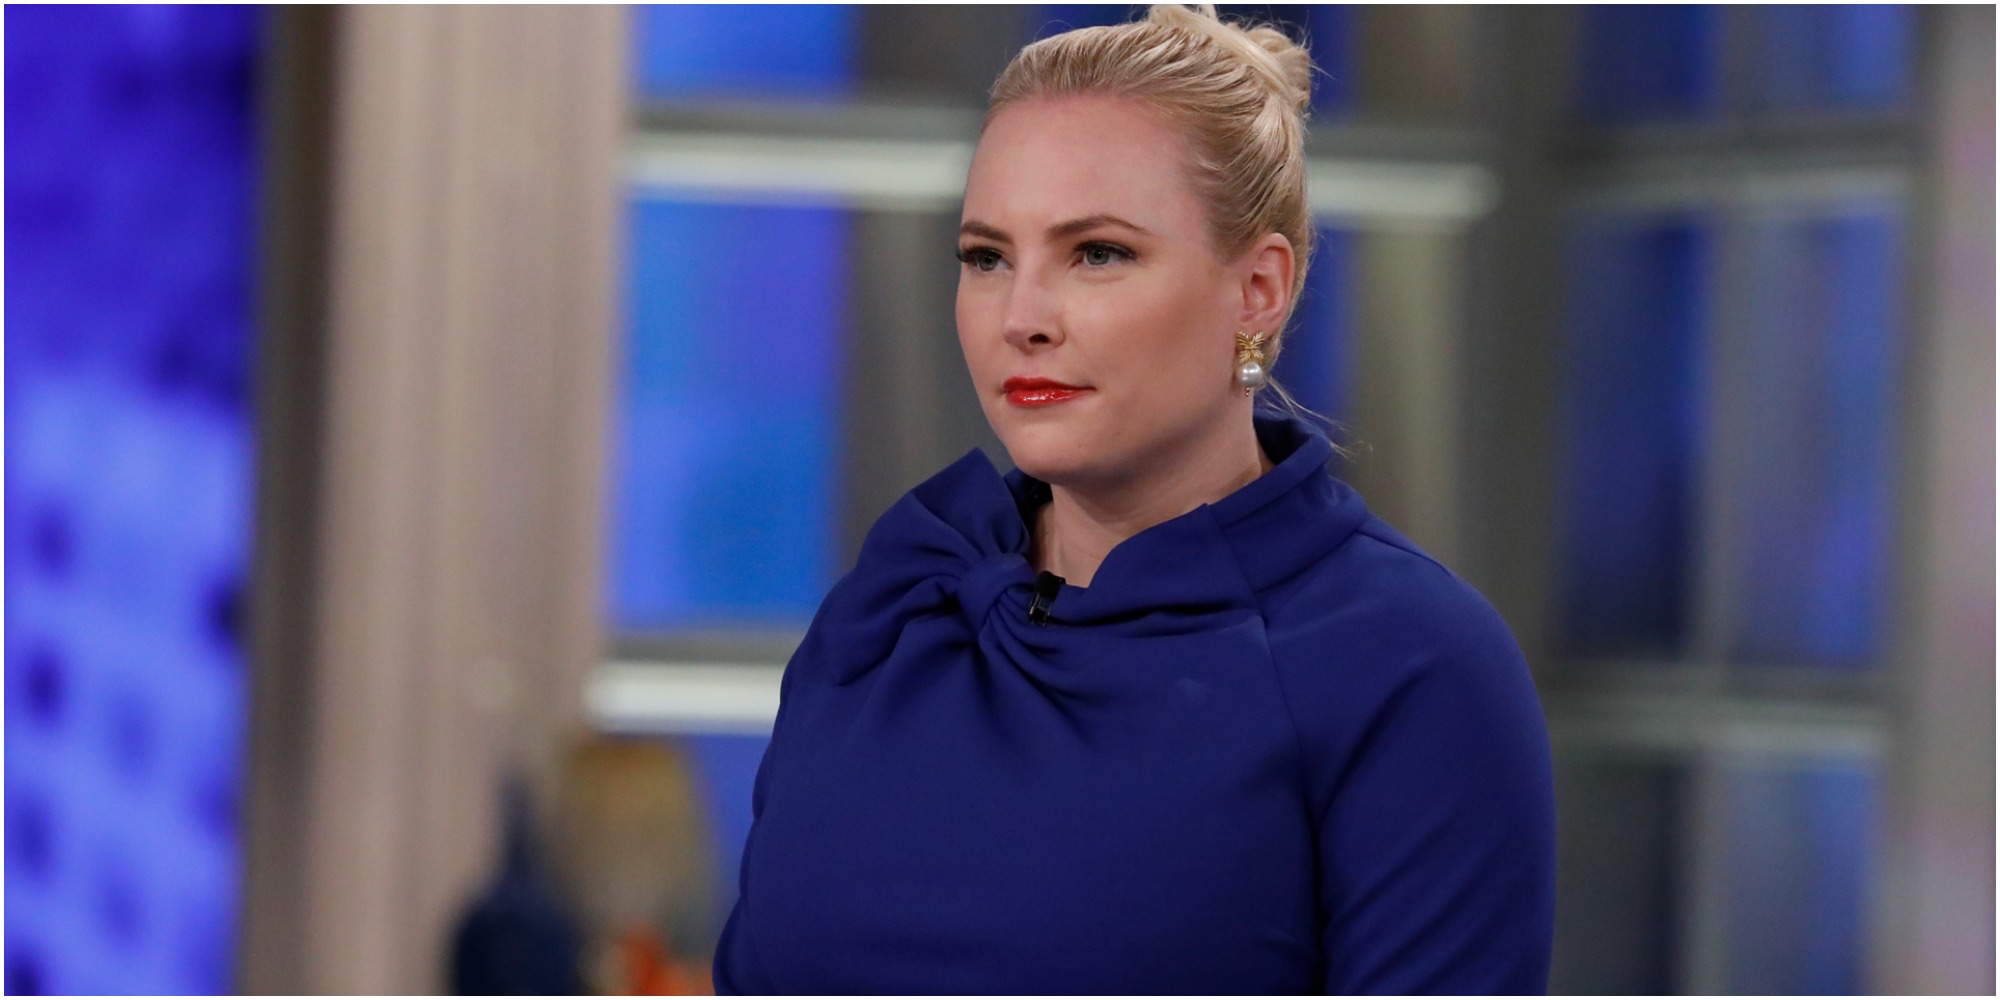 Meghan McCain sits on the panel of "The View" wearing a blue dress.